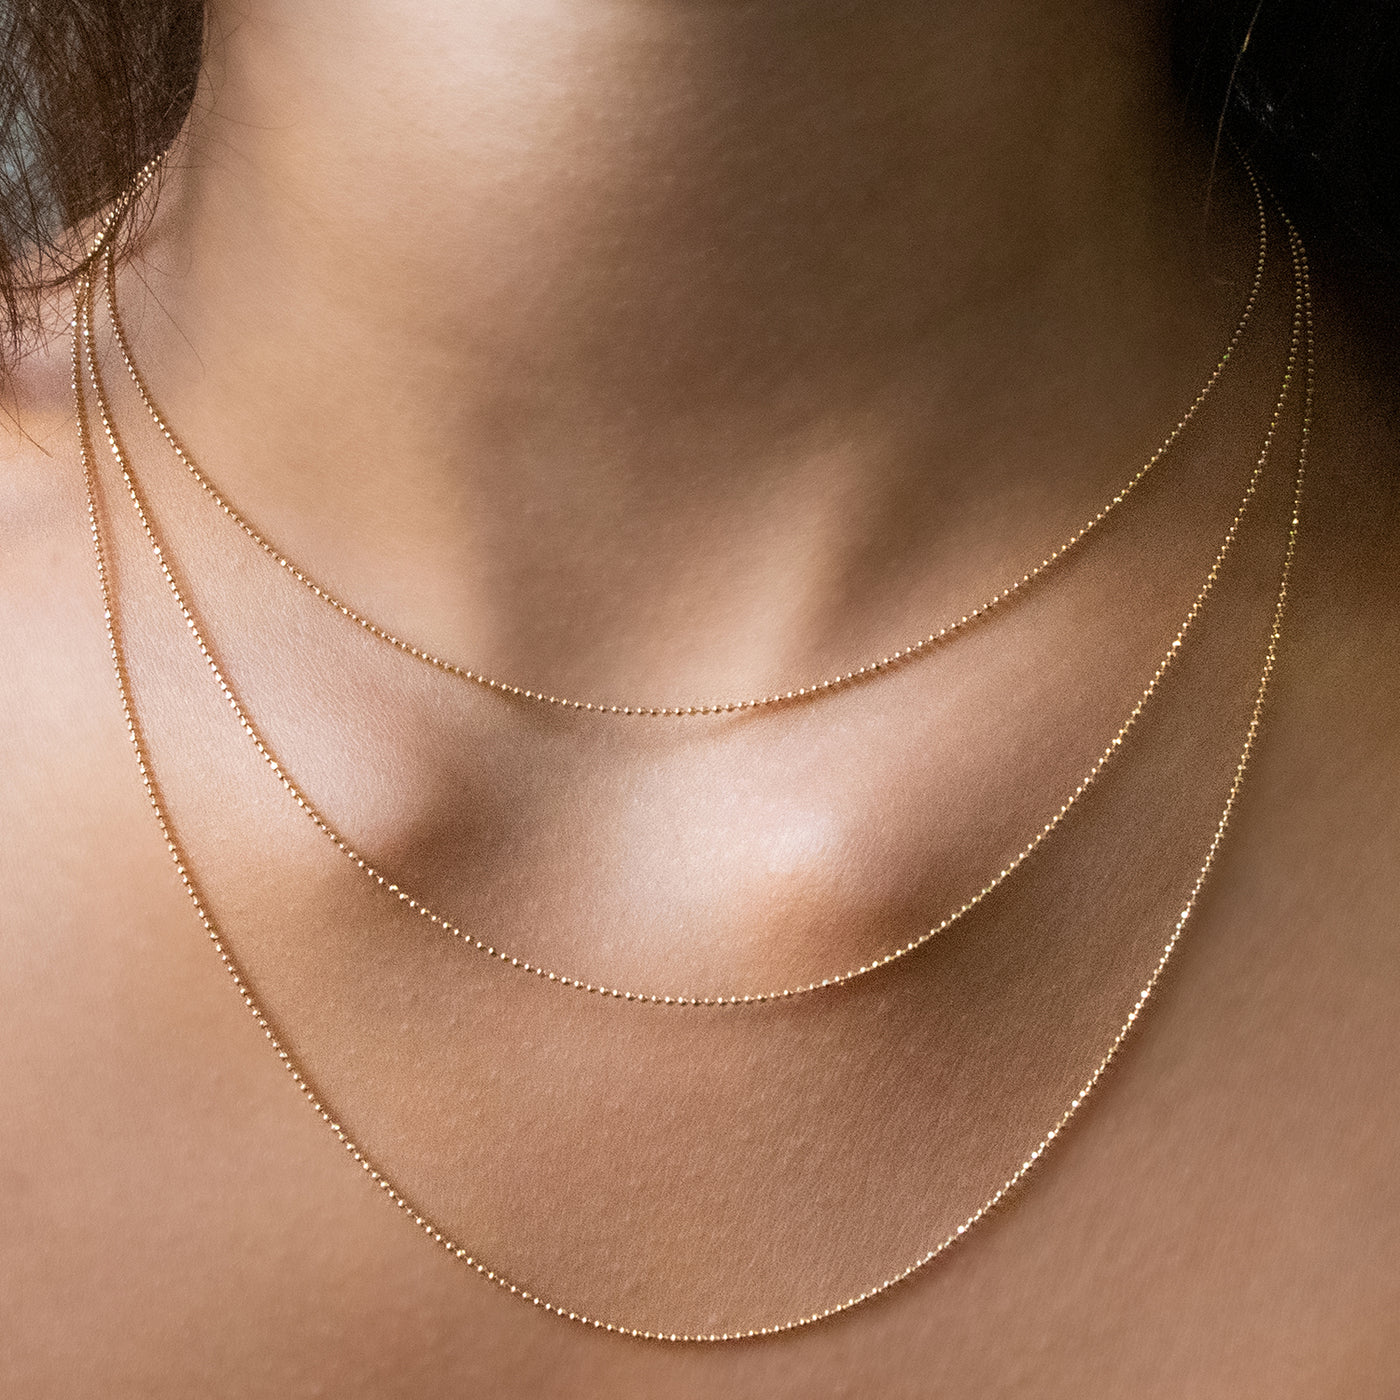 Disco Chain in 14kt Gold - 1.2 mm